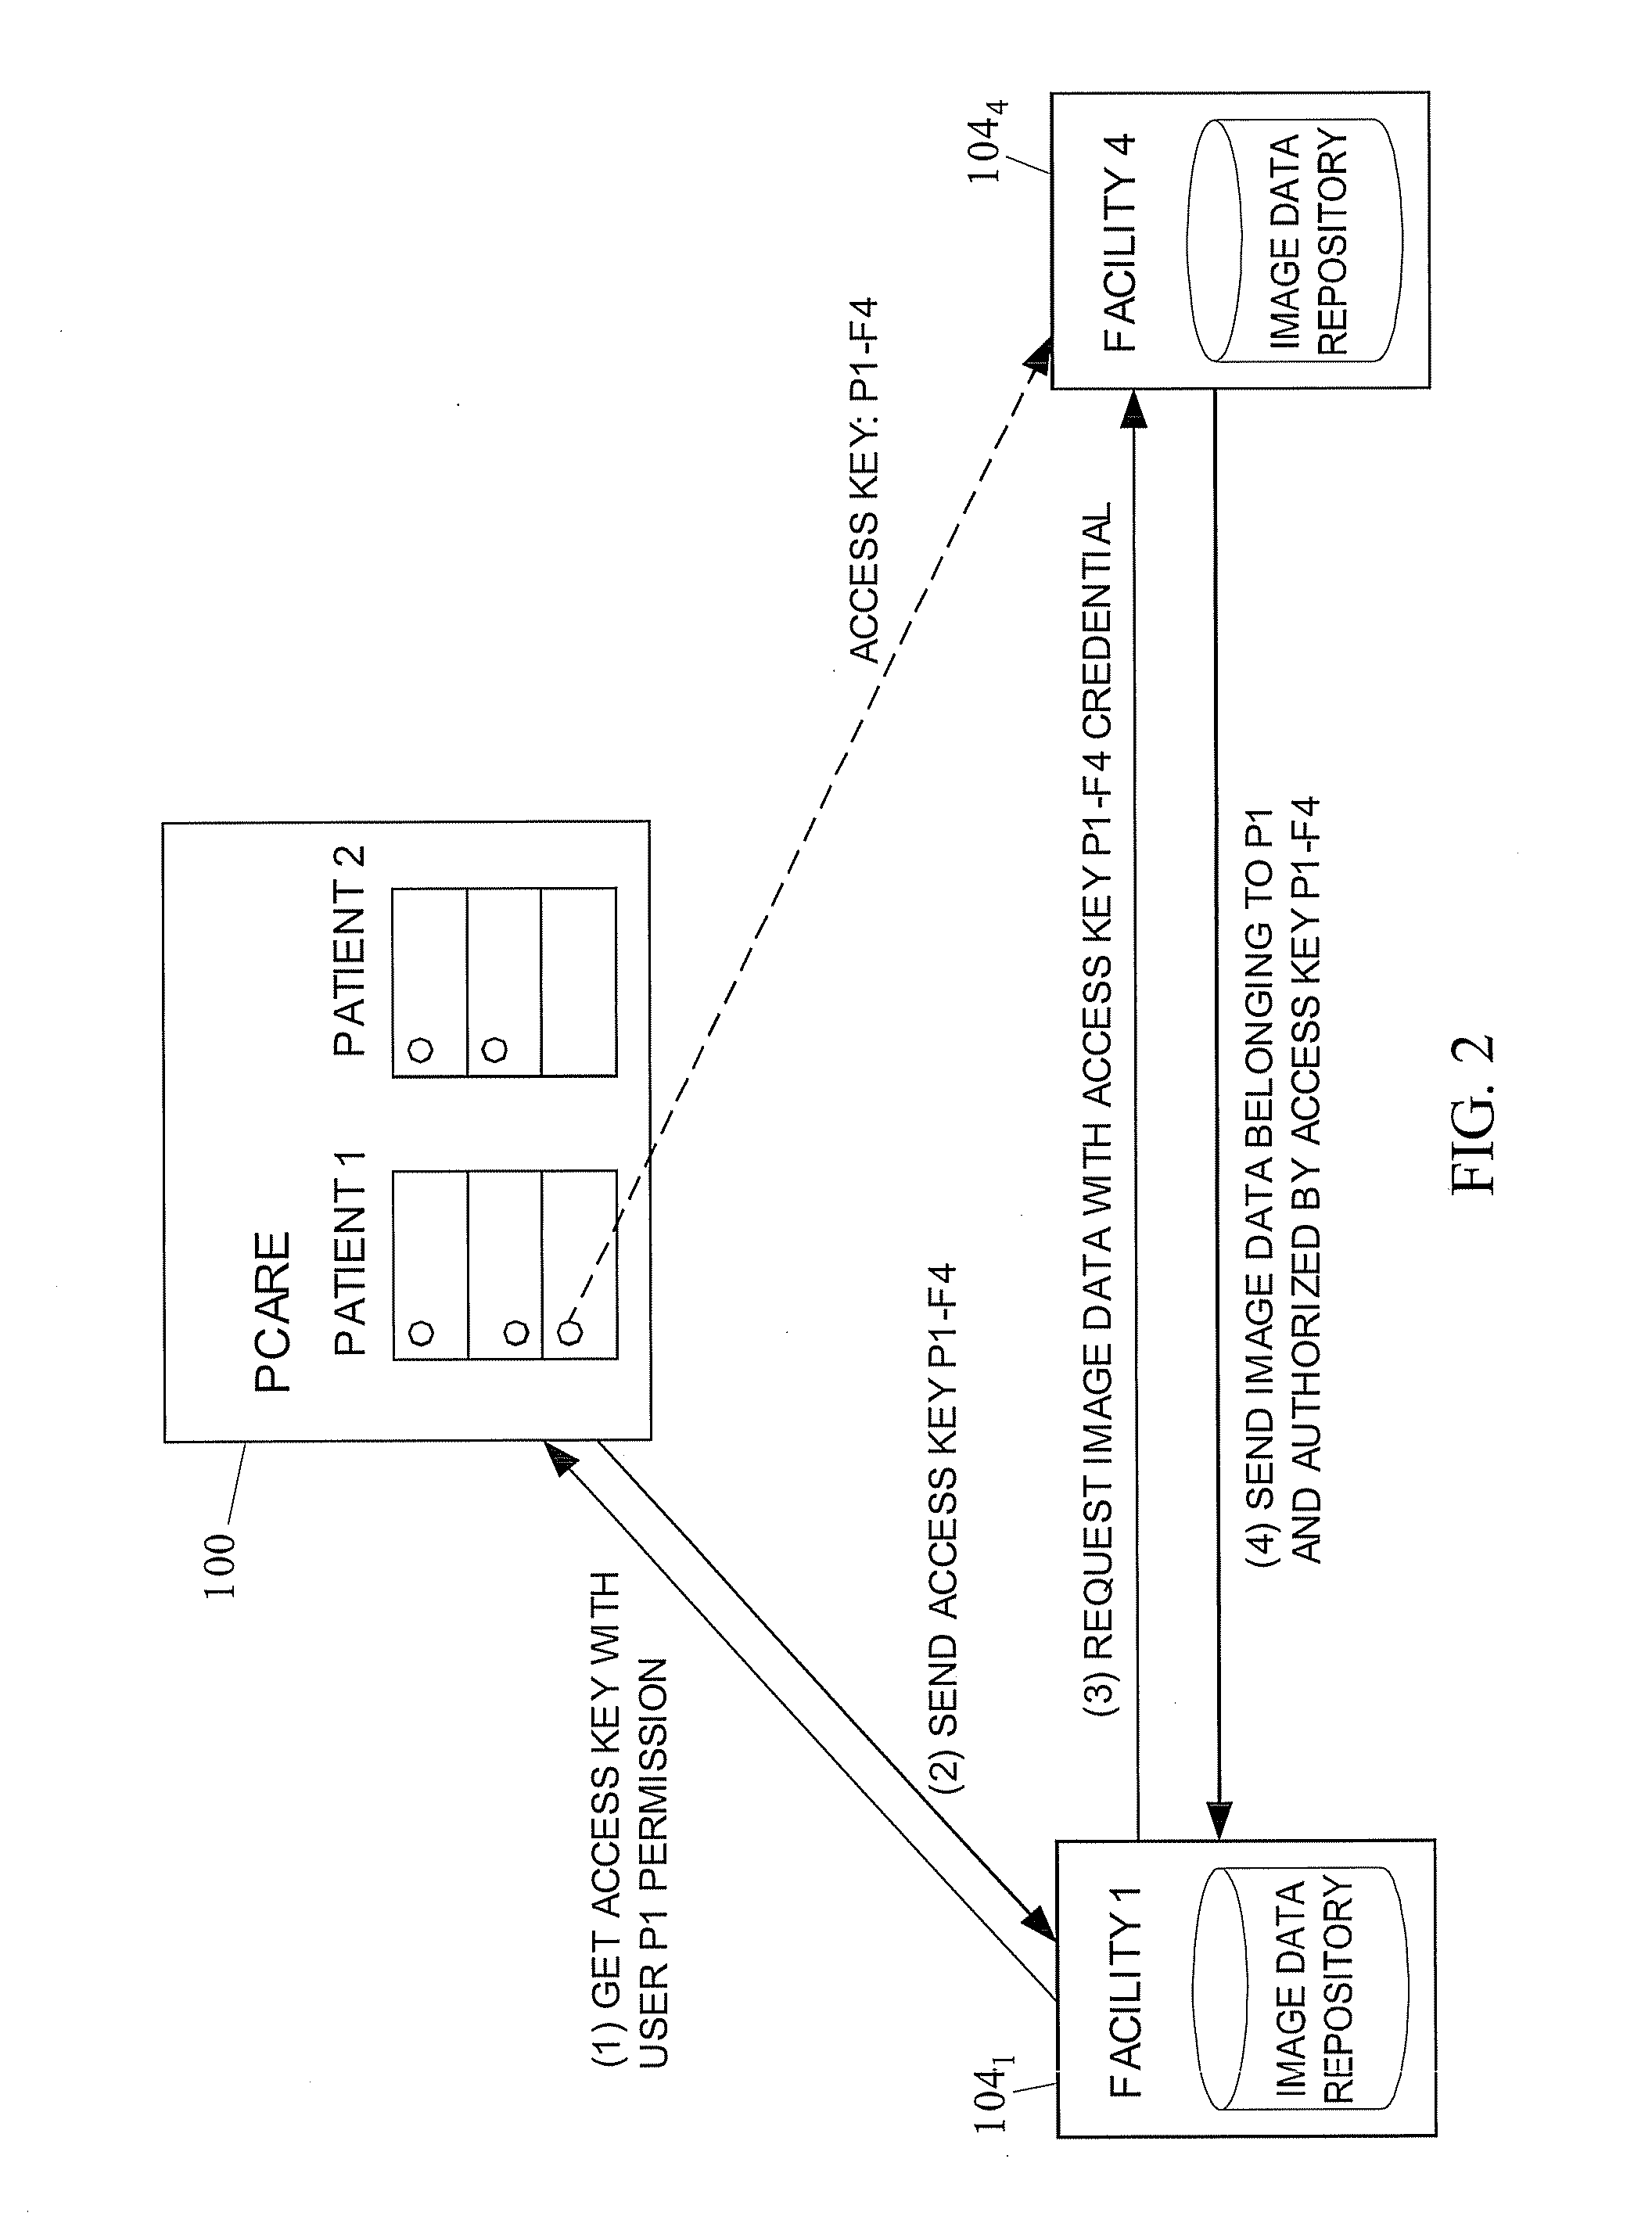 Method and apparatus for personally controlled sharing of medical image and other health data